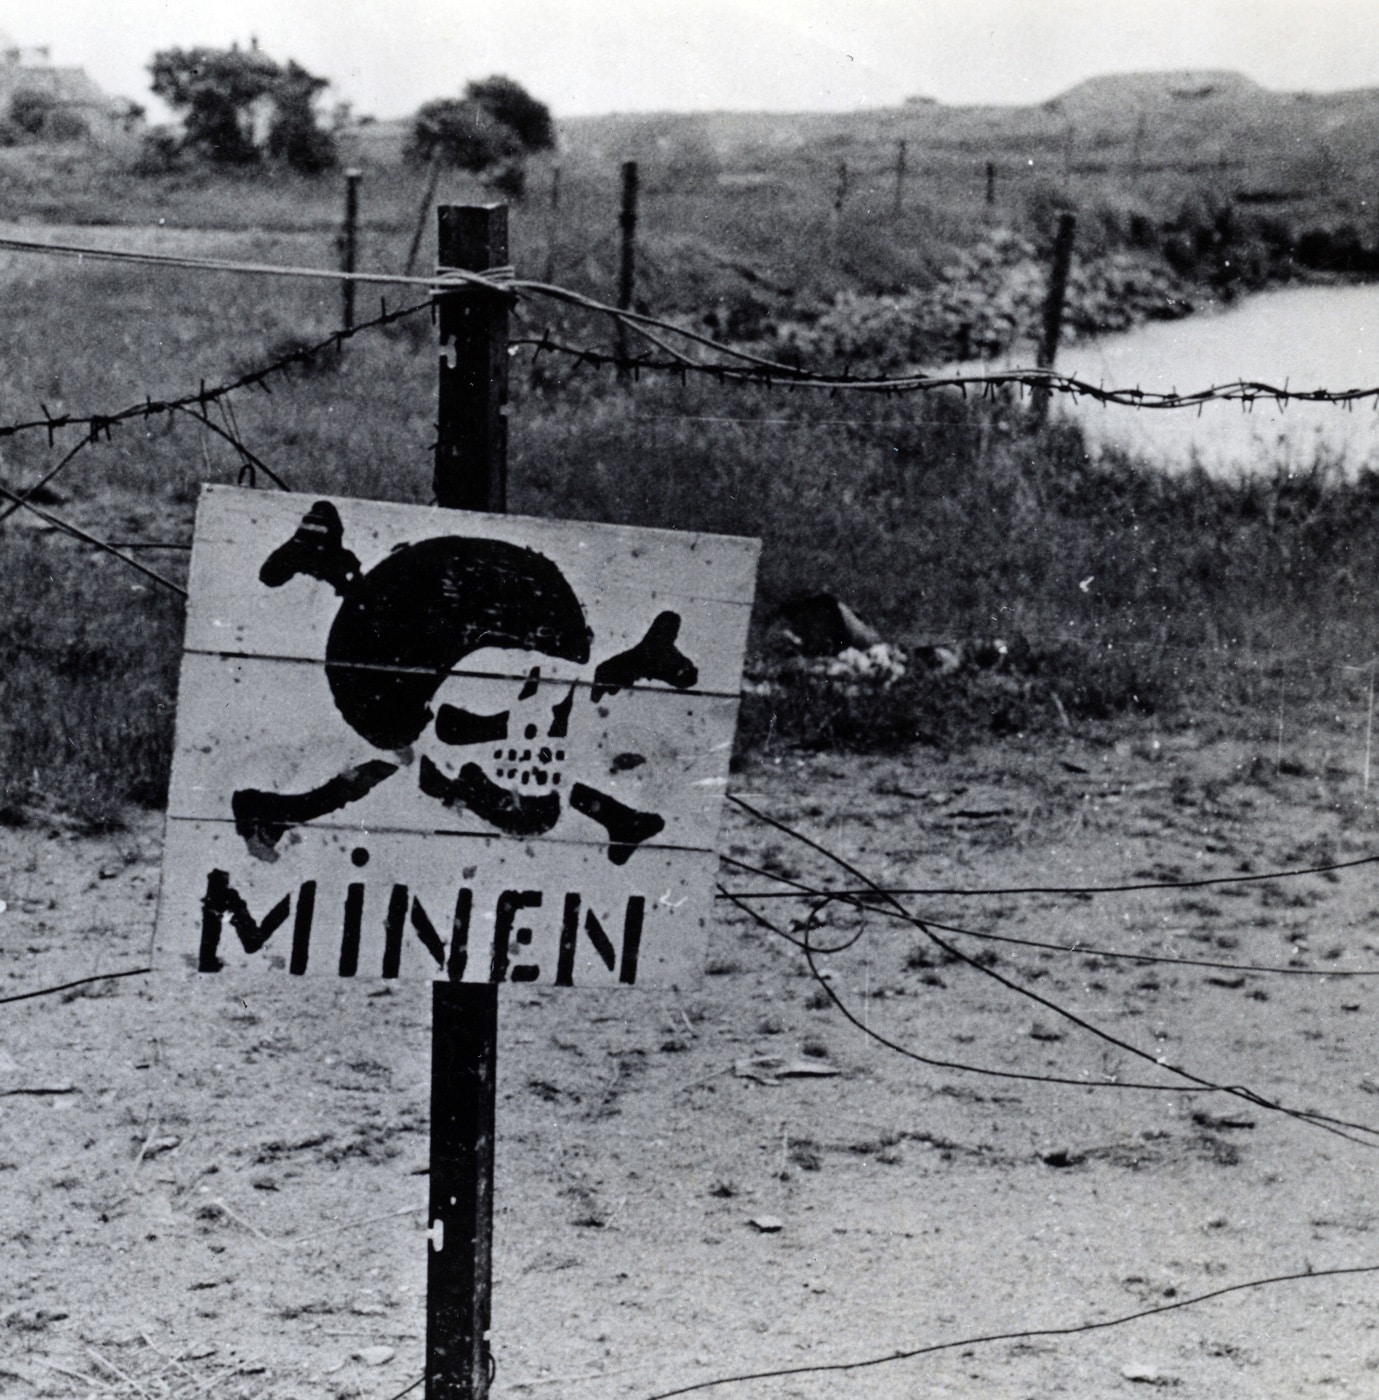 German minefields were common defensive measures used in Normandy France.